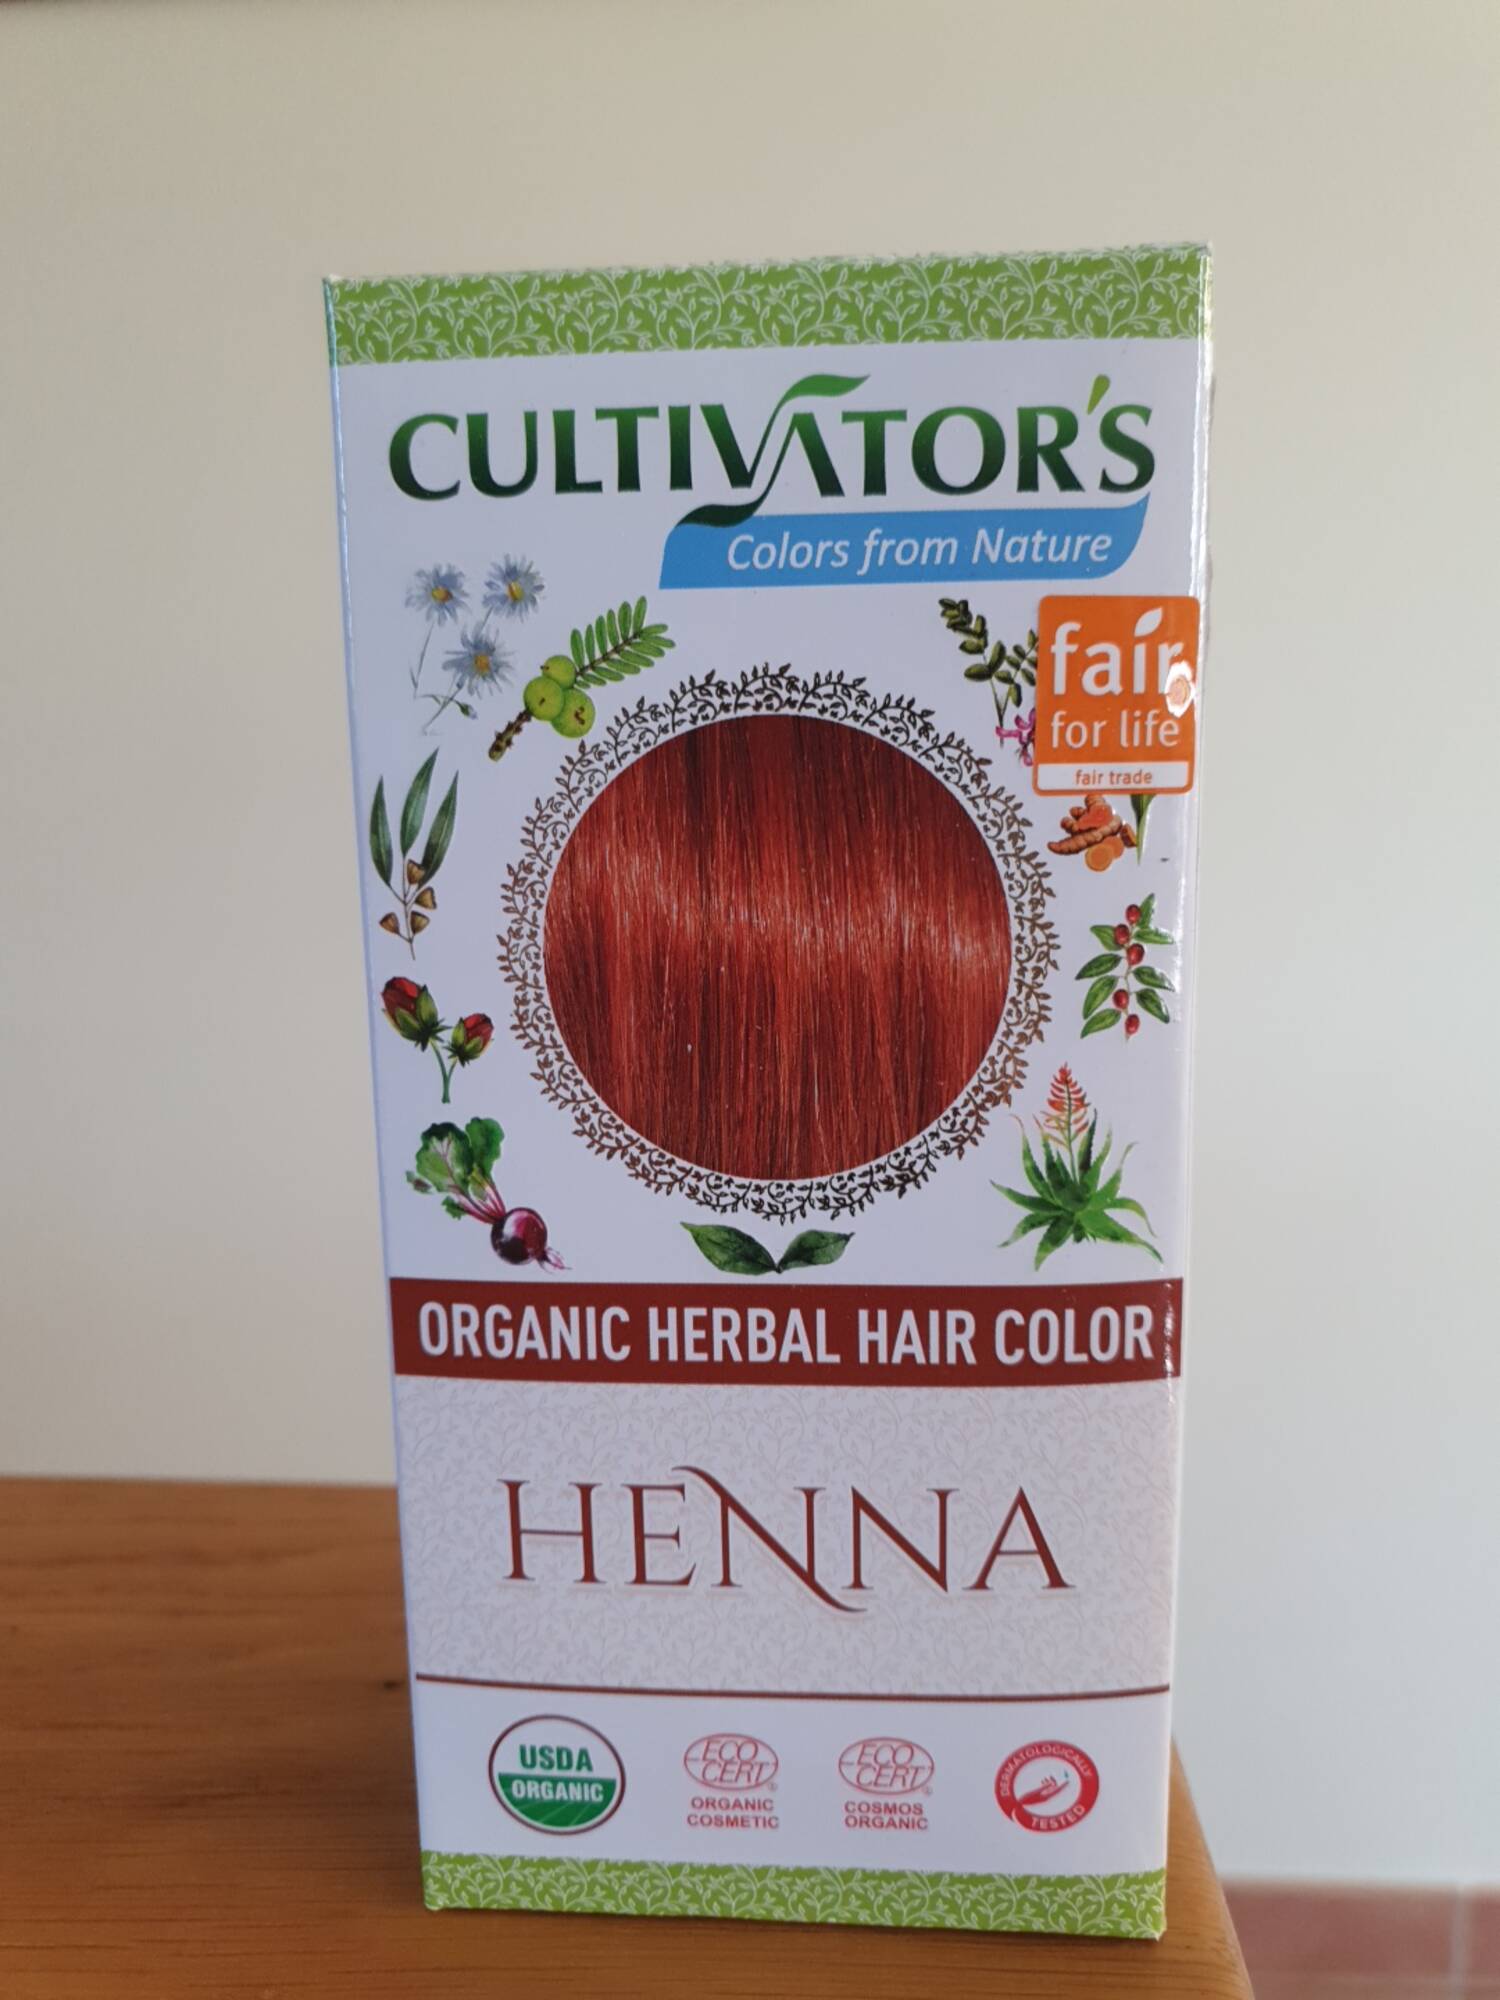 CULTIVATOR'S - Henna - Organic herbal hair color  